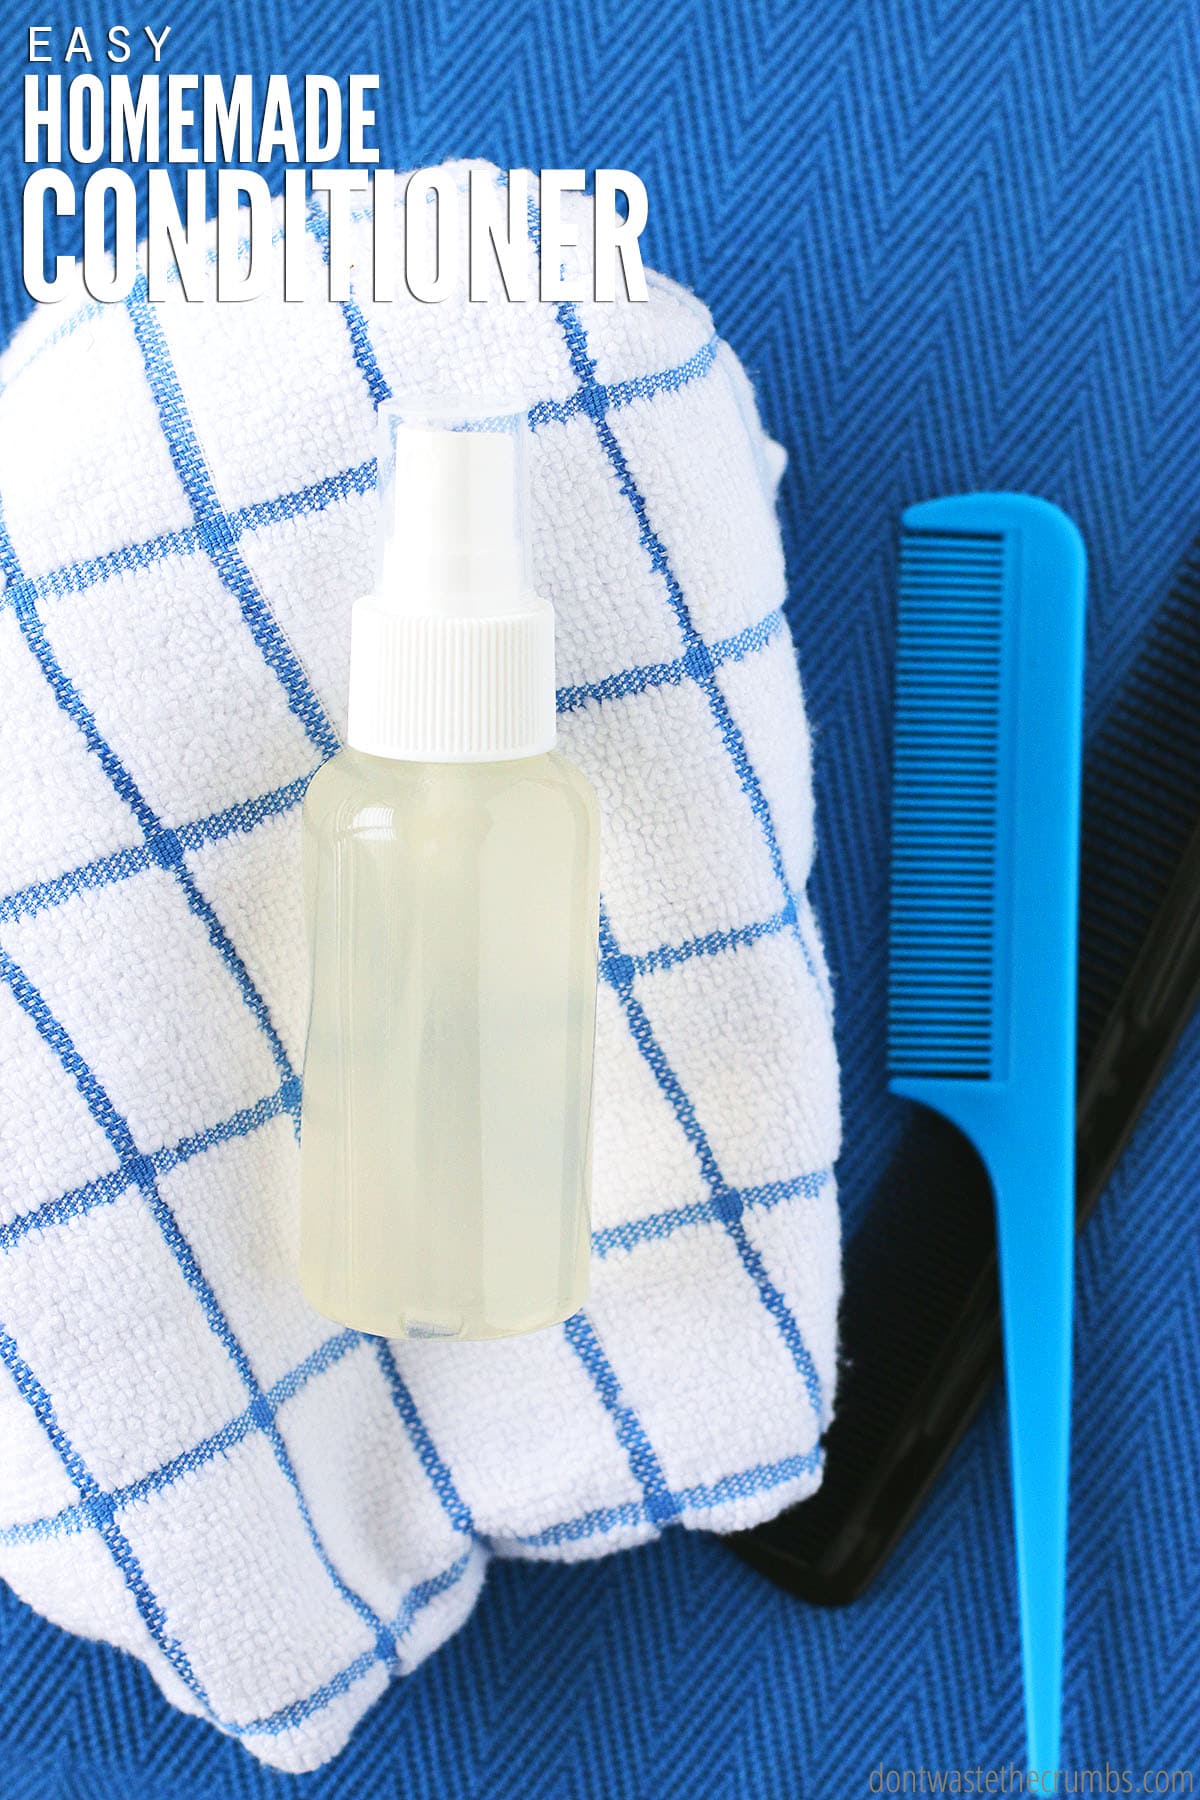 A spray bottle of homemade conditioner lying on a checked towel, with a comb to the right.